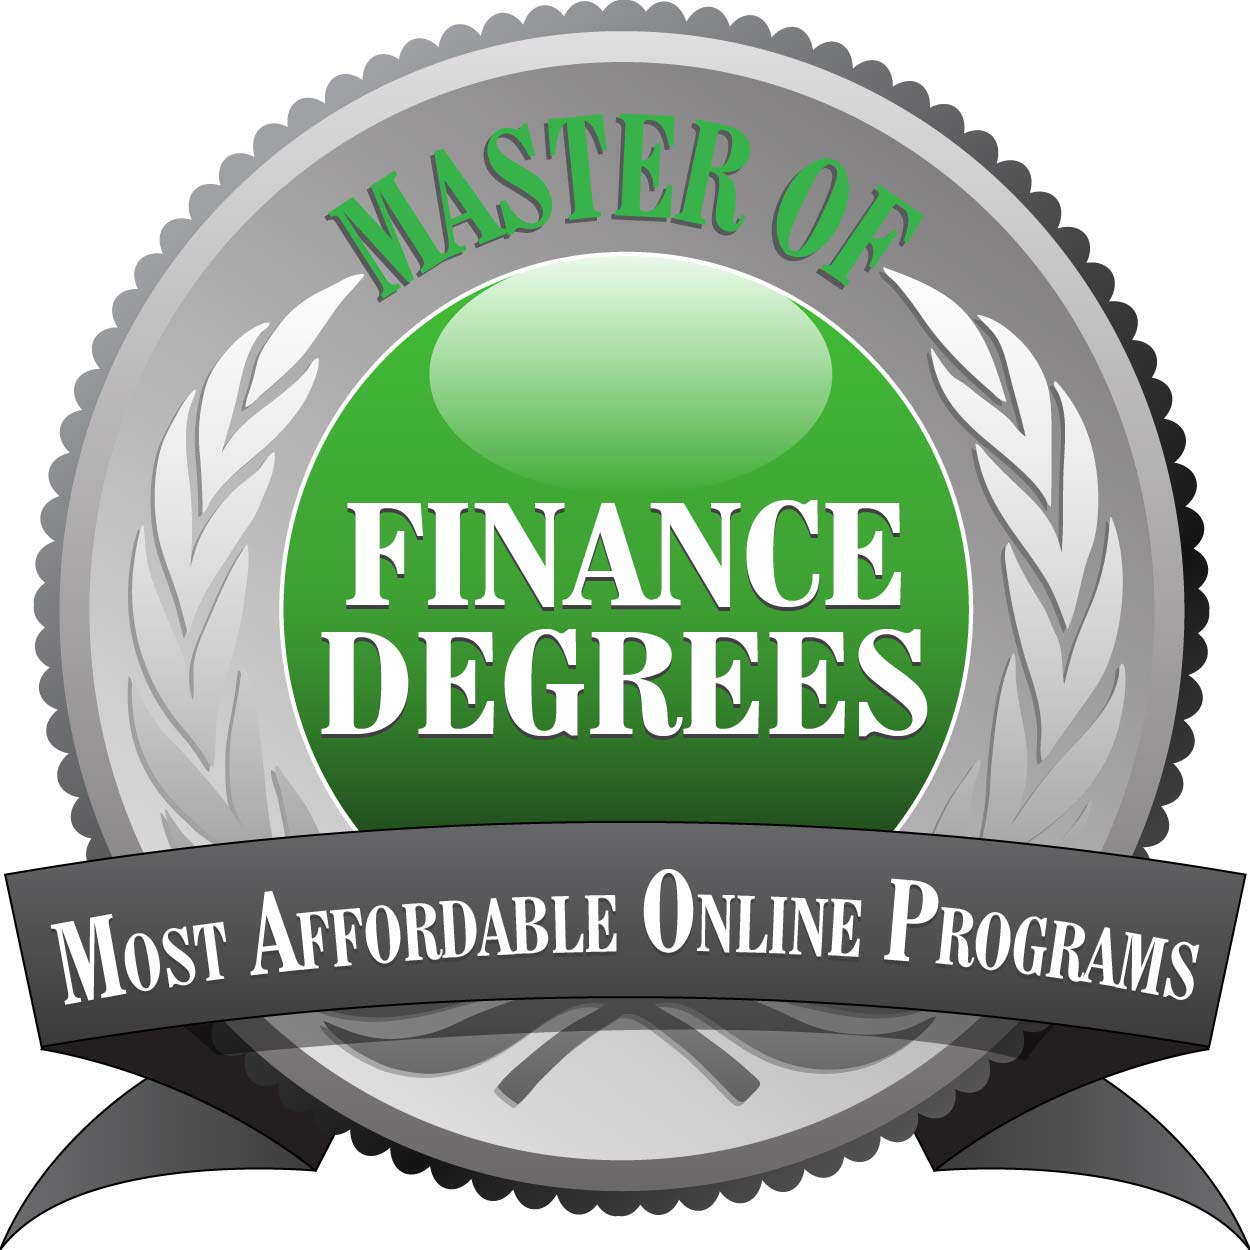 Top 50 Affordable MBA Degree Programs - Master of Finance Degrees